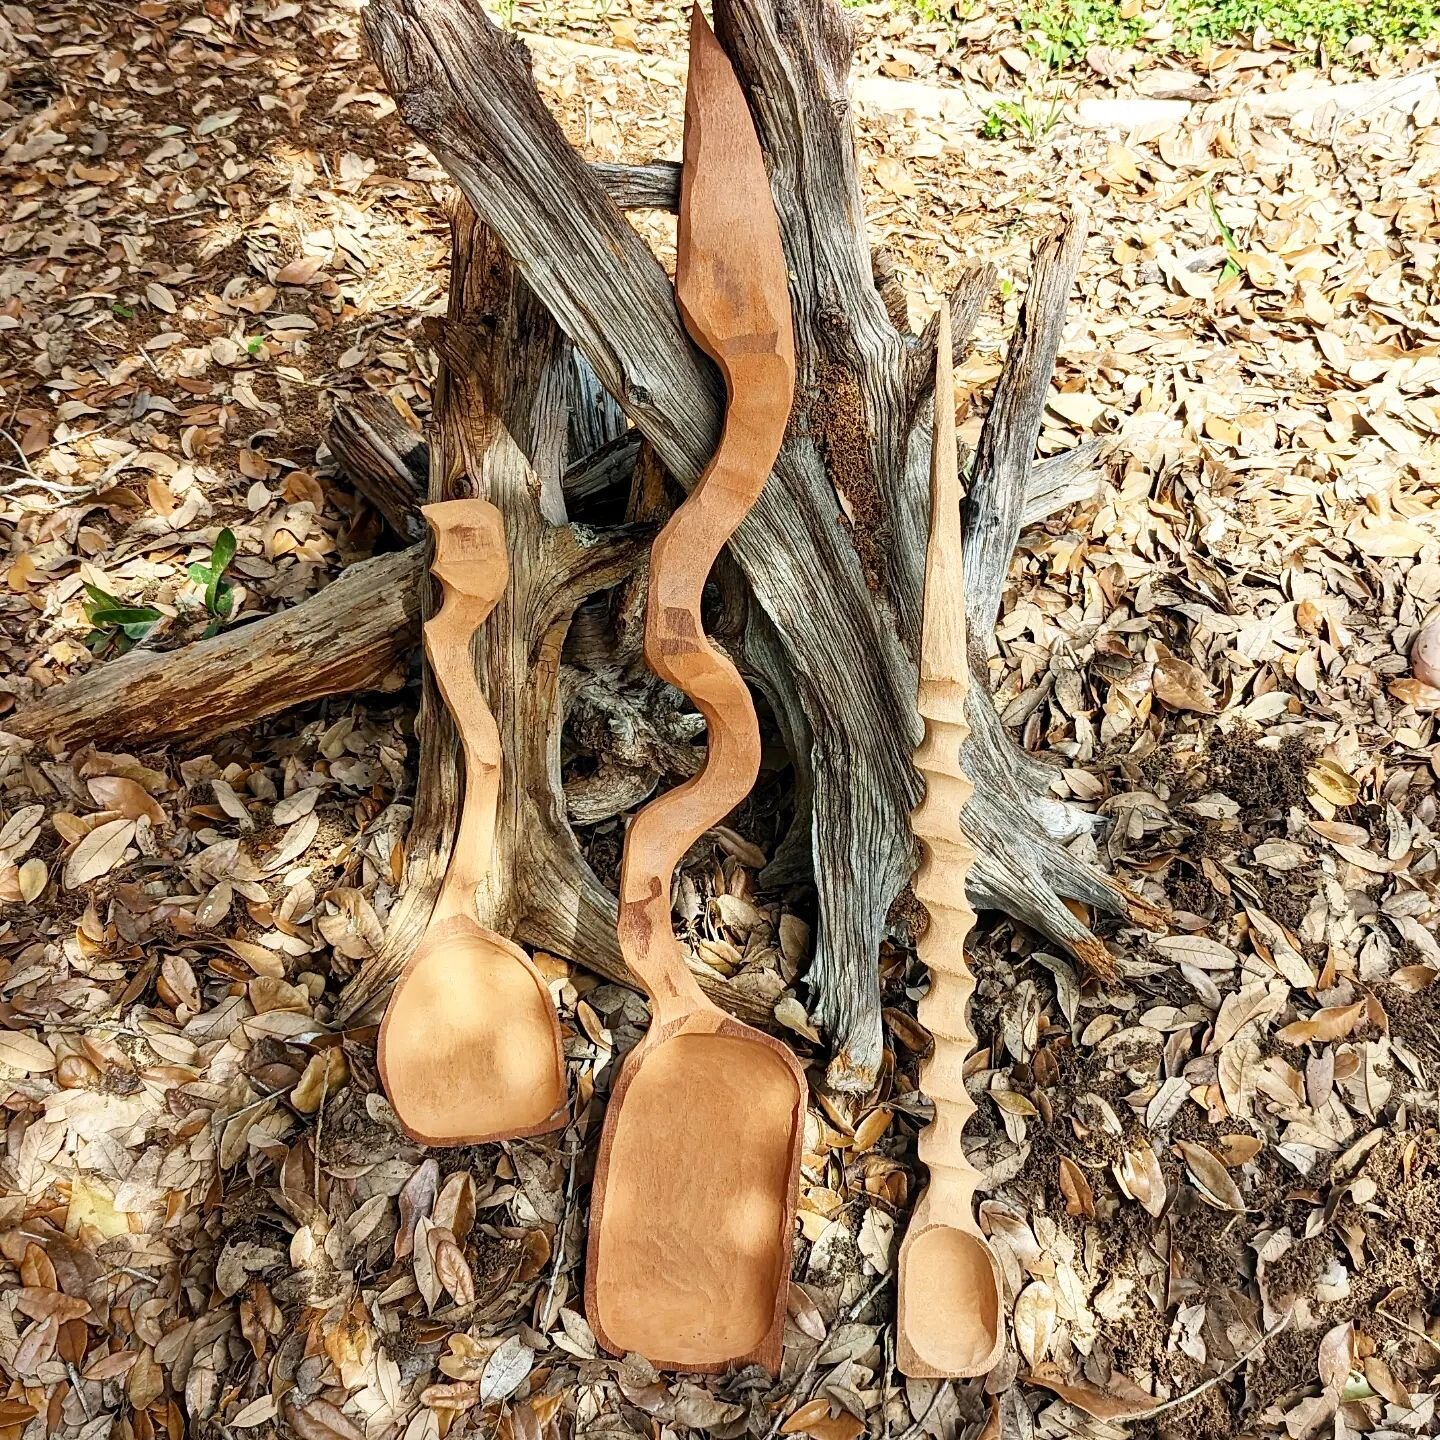 Some new spoons in progress. Getting ready @austinwitchfest in a few weeks. Should be a lot of fun!

#witch #woodenspoon #potions #austinwitches #handmade #spooncarving #workwithyourhands #suppprtsmallbusiness #suportlocalbusiness #shopsmall